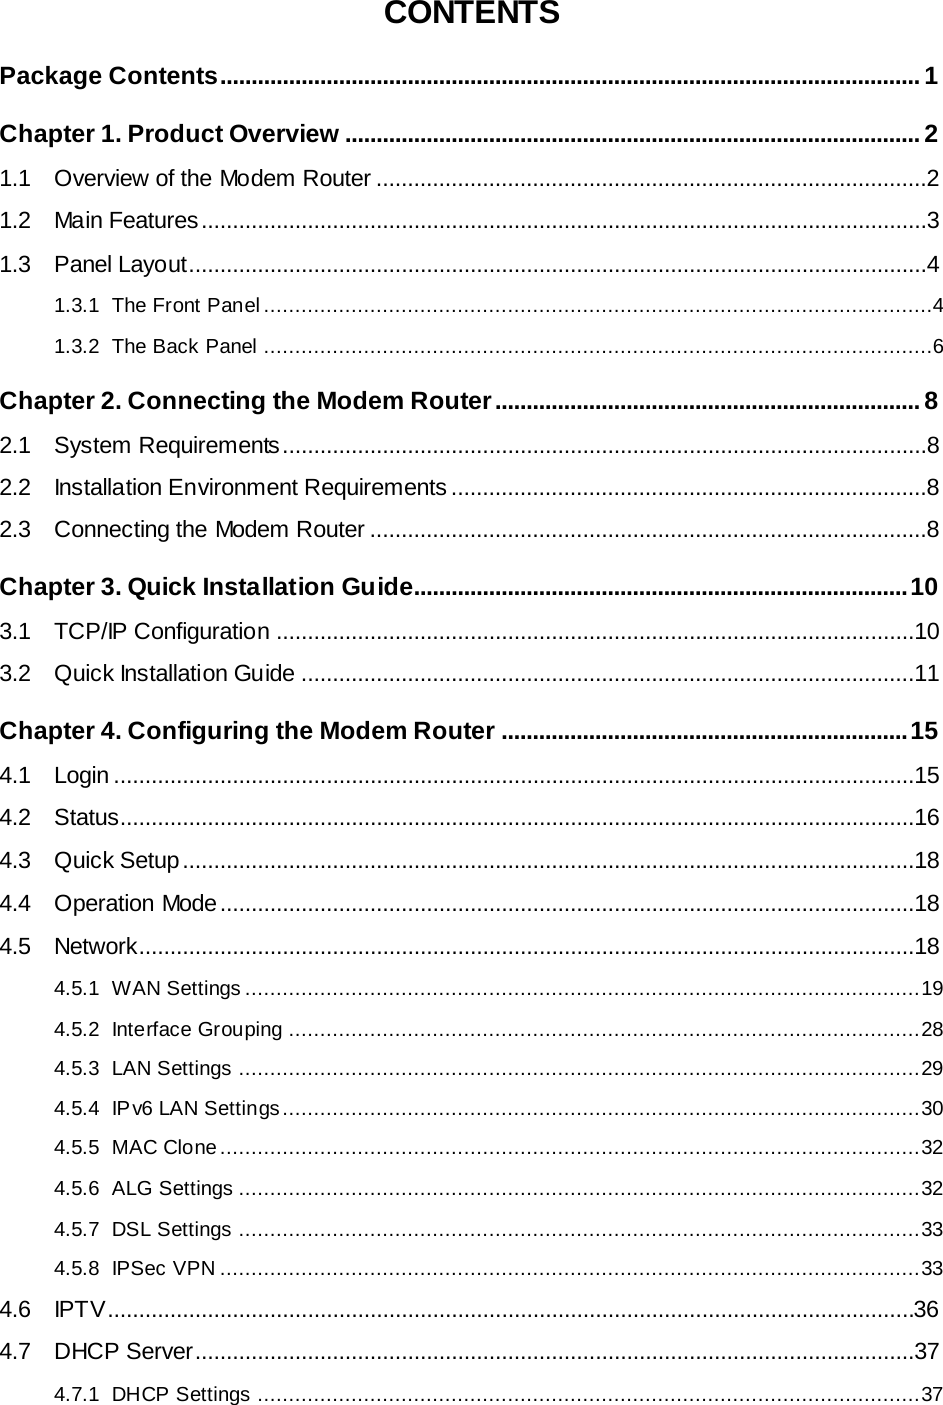  CONTENTS Package Contents ................................................................................................................ 1 Chapter 1. Product Overview ............................................................................................ 2 1.1 Overview of the Modem Router ........................................................................................2 1.2 Main Features....................................................................................................................3 1.3 Panel Layout......................................................................................................................4 1.3.1 The Front Panel ...........................................................................................................4 1.3.2 The Back Panel ...........................................................................................................6 Chapter 2. Connecting the Modem Router .................................................................... 8 2.1 System Requirements .......................................................................................................8 2.2 Installation Environment Requirements ............................................................................8 2.3 Connecting the Modem Router .........................................................................................8 Chapter 3. Quick Installation Guide............................................................................... 10 3.1 TCP/IP Configuration ......................................................................................................10 3.2 Quick Installation Guide ..................................................................................................11 Chapter 4. Configuring the Modem Router ................................................................. 15 4.1 Login ................................................................................................................................15 4.2 Status...............................................................................................................................16 4.3 Quick Setup .....................................................................................................................18 4.4 Operation Mode ...............................................................................................................18 4.5 Network............................................................................................................................18 4.5.1 WAN Settings ............................................................................................................ 19 4.5.2 Interface Grouping ..................................................................................................... 28 4.5.3 LAN Settings ............................................................................................................. 29 4.5.4 IPv6 LAN Settings ...................................................................................................... 30 4.5.5 MAC Clone ................................................................................................................ 32 4.5.6 ALG Settings ............................................................................................................. 32 4.5.7 DSL Settings ............................................................................................................. 33 4.5.8 IPSec VPN ................................................................................................................ 33 4.6 IPTV .................................................................................................................................36 4.7 DHCP Server ...................................................................................................................37 4.7.1 DHCP Settings .......................................................................................................... 37  